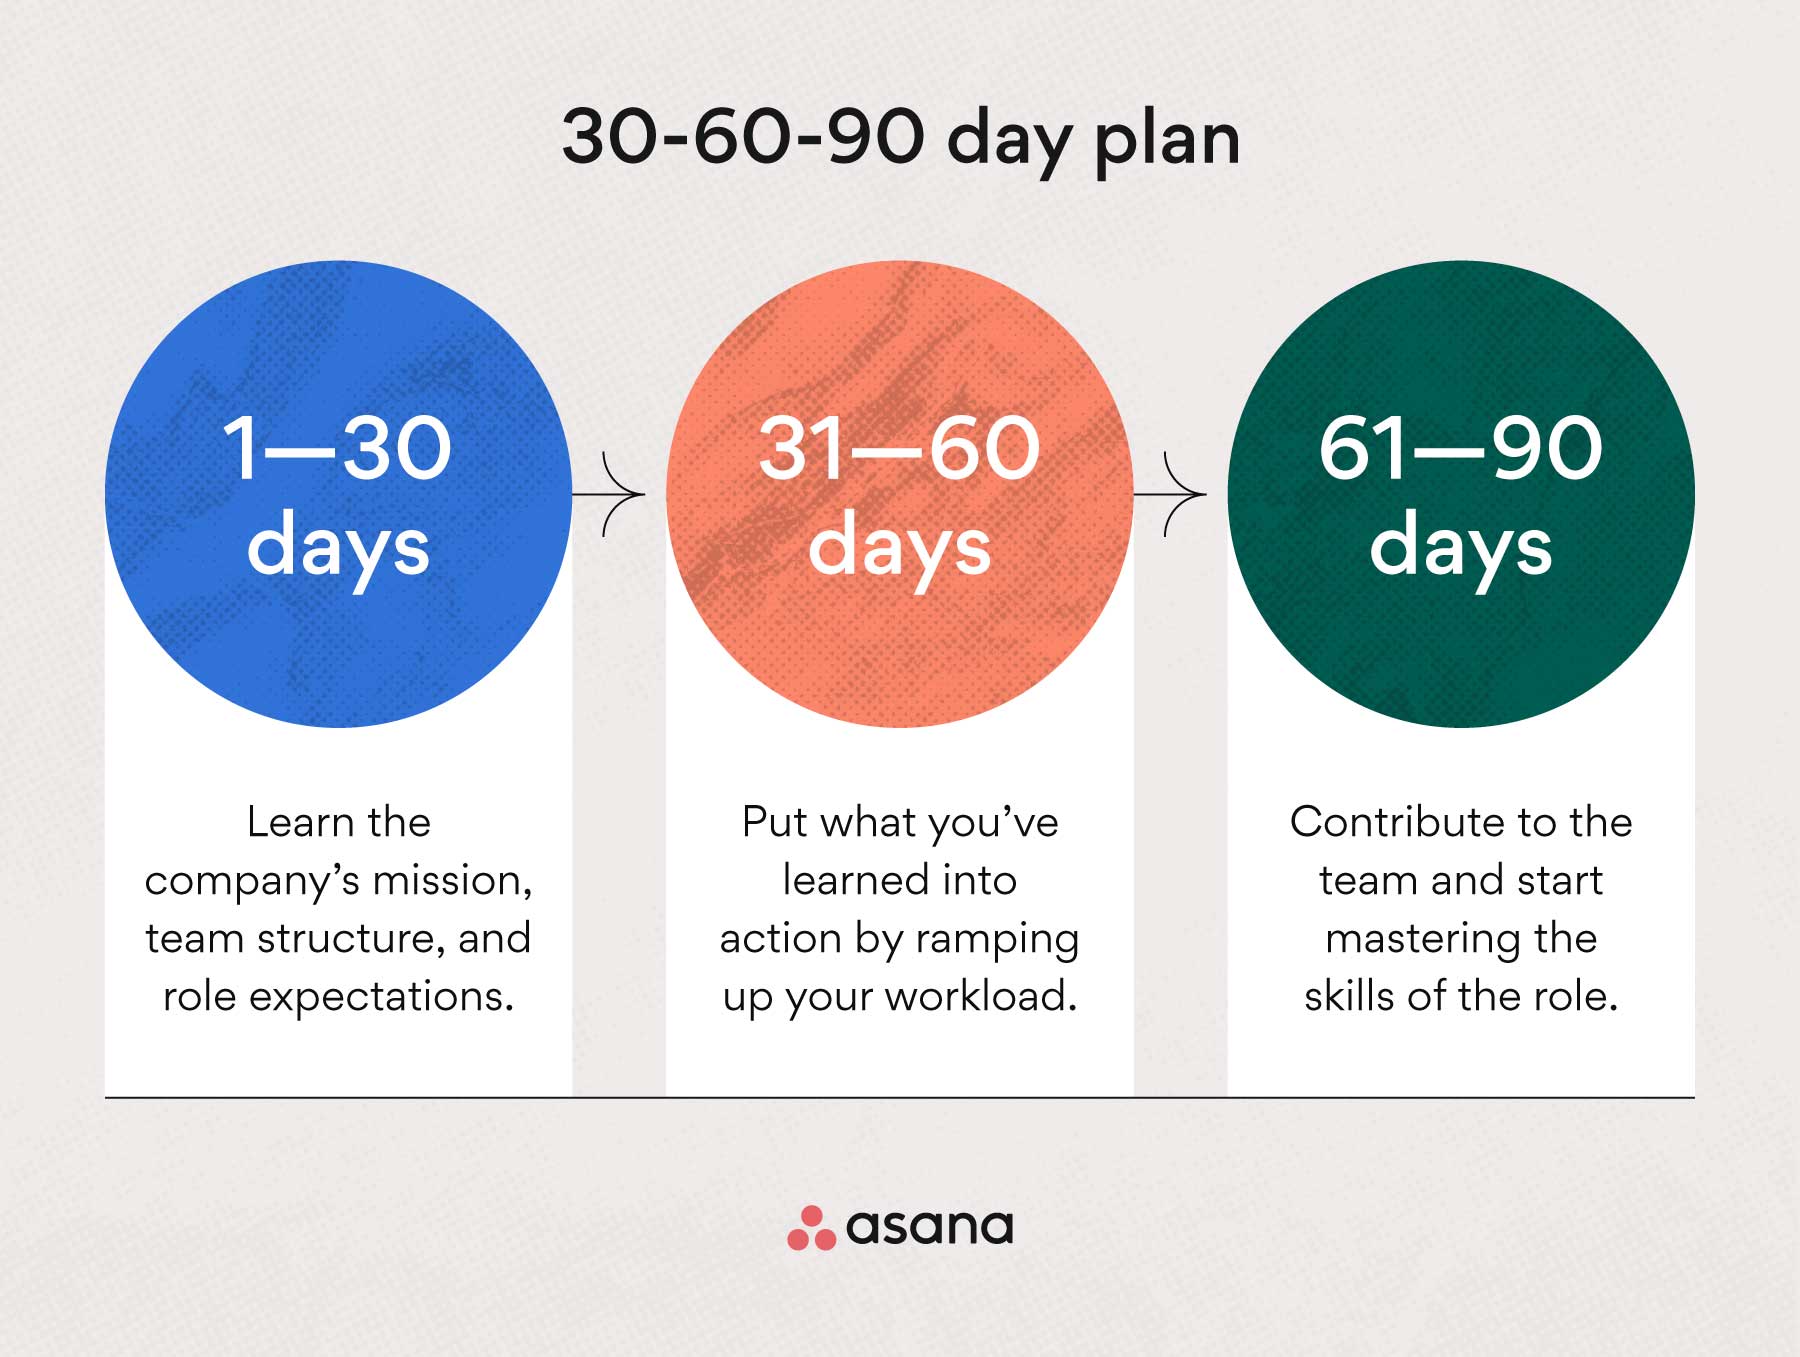 What is a 30-60-90 day plan?